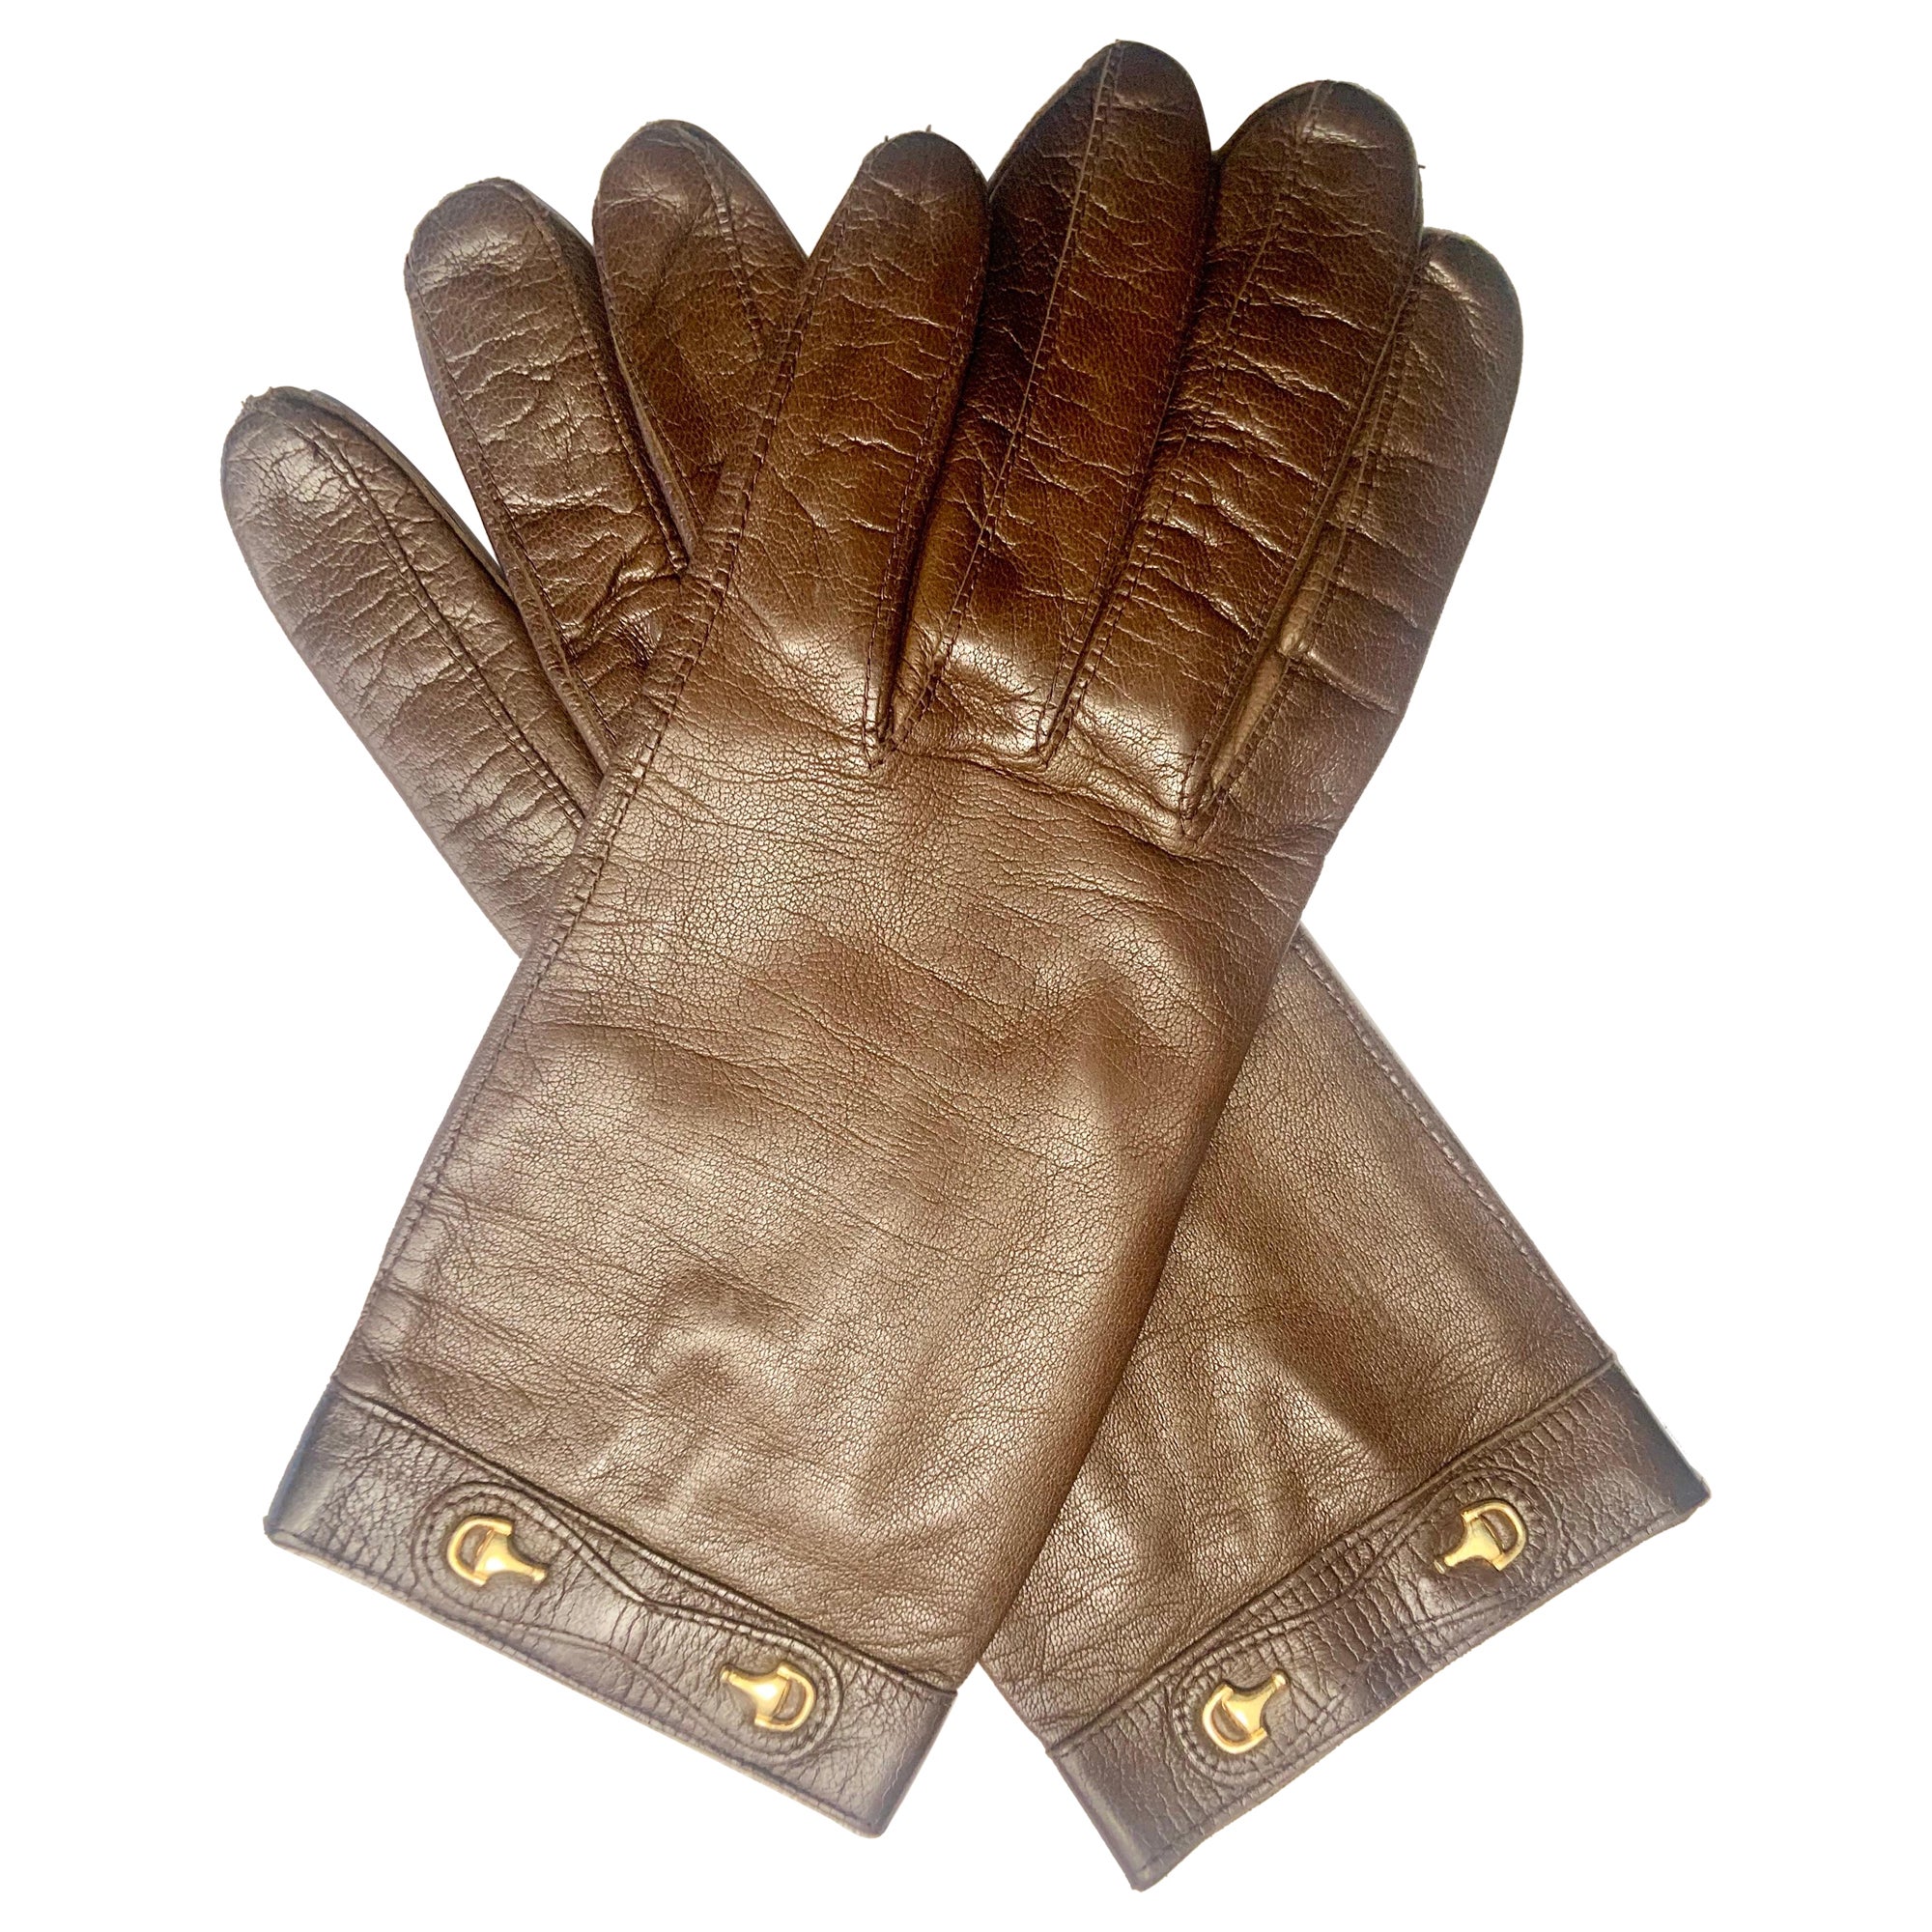 1980's Gucci Equestrian Theme Brown Leather Gloves Never Worn 6 1/2 For Sale